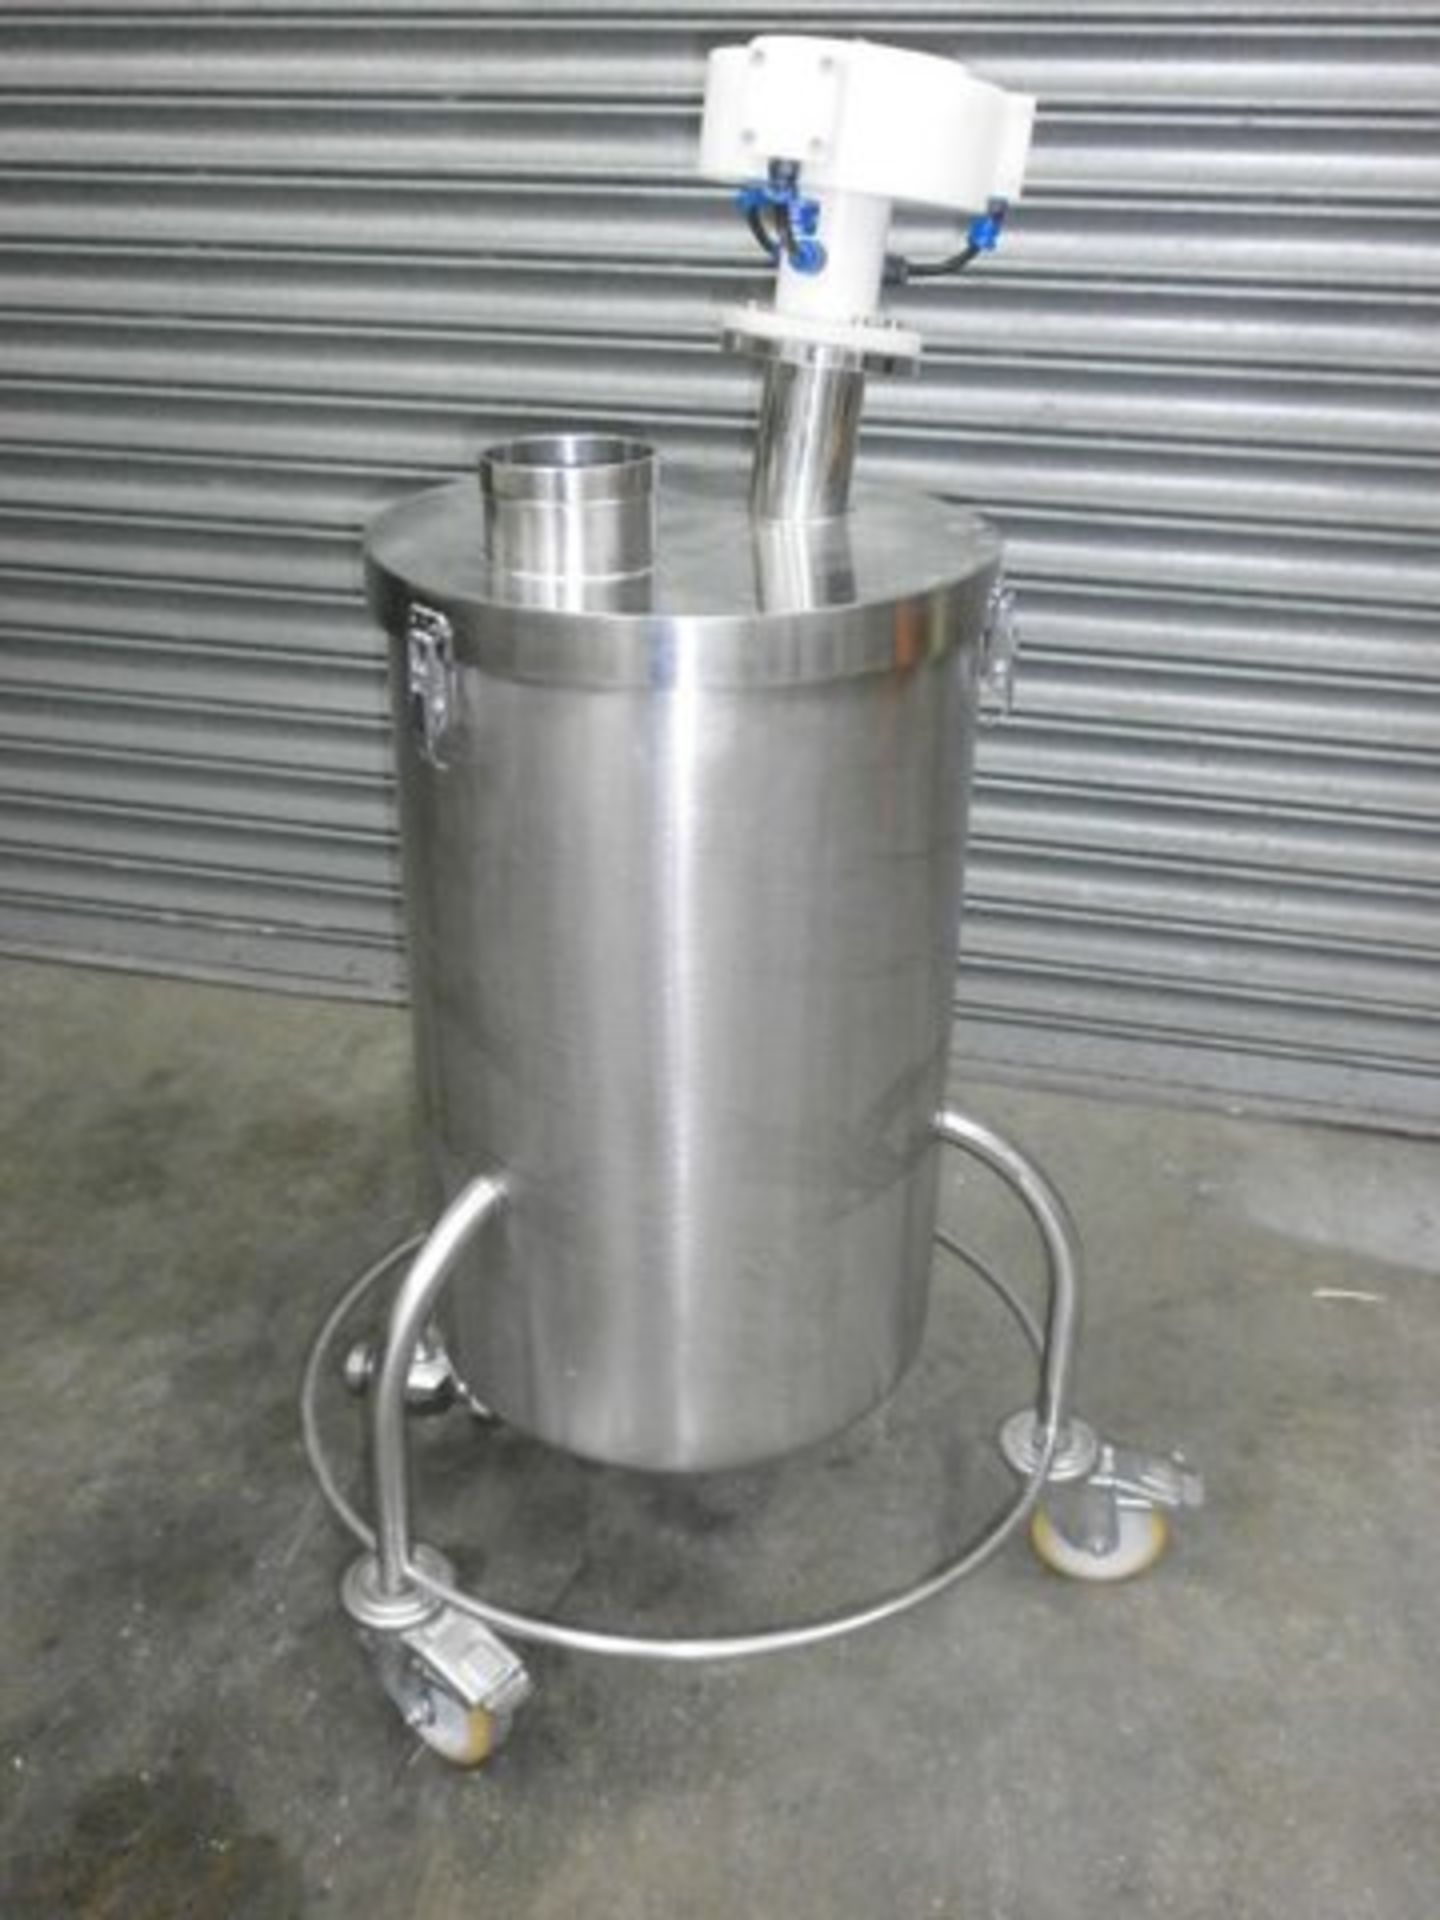 Dynatork Air Stirer on mobile Stainless steel drum. Located in Corby